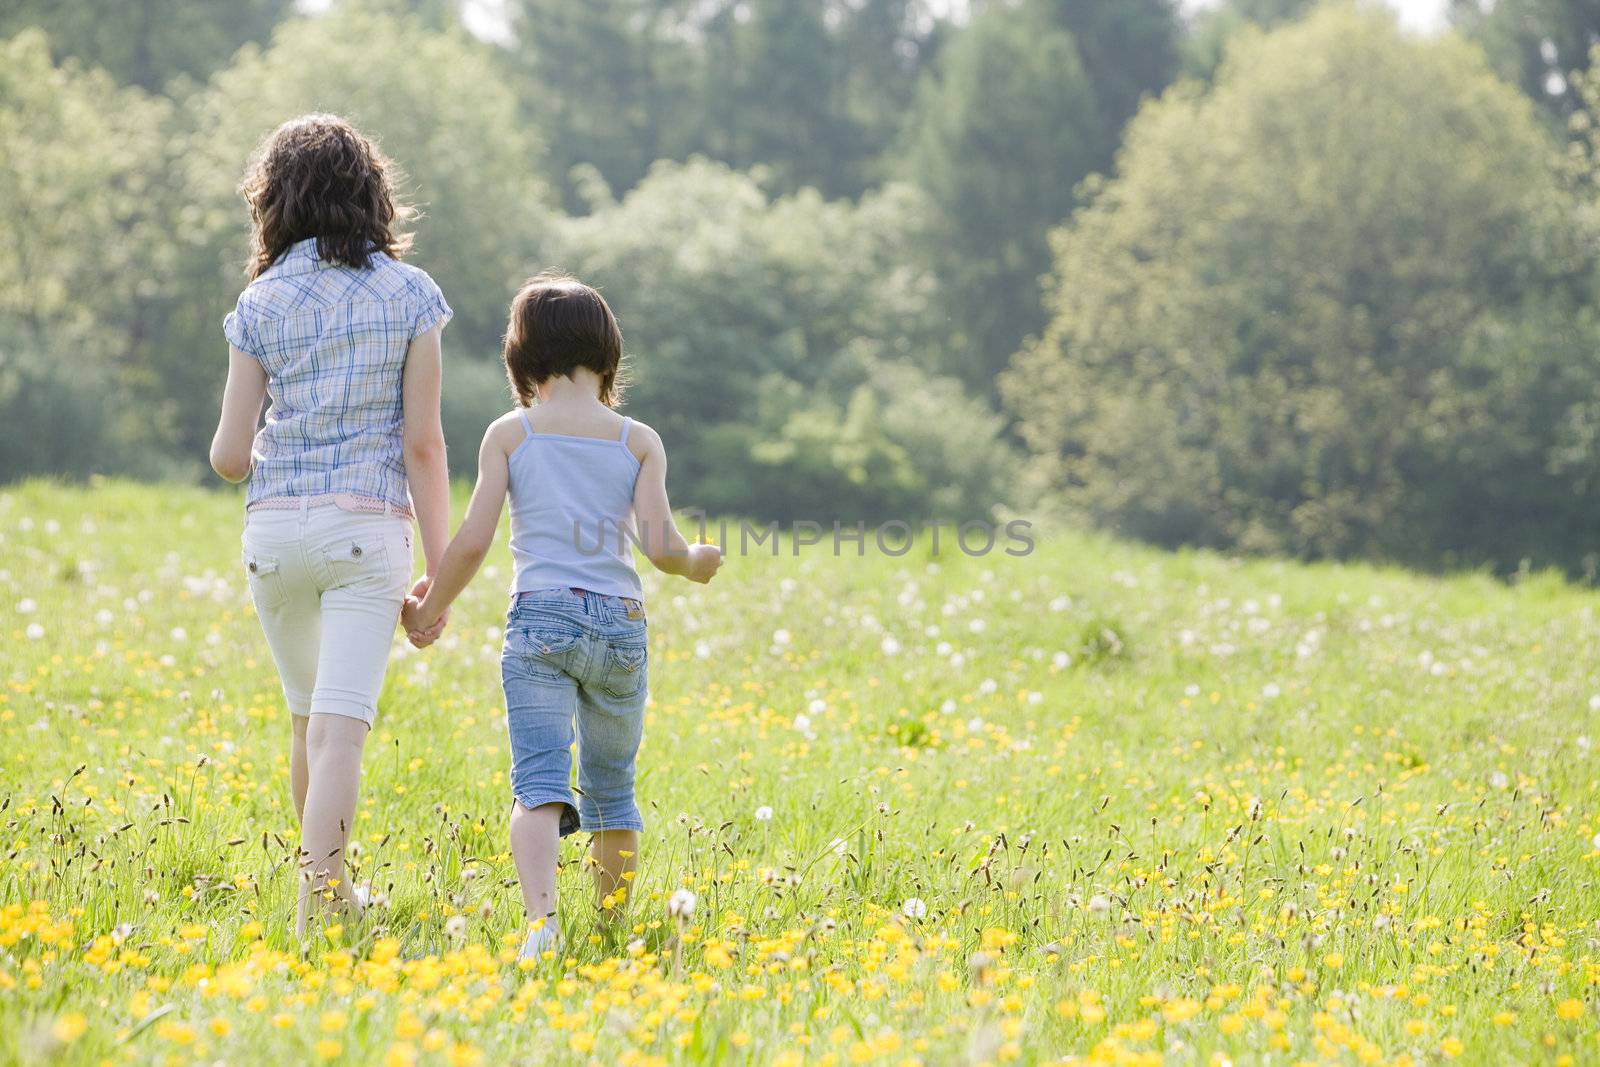 two girls walking away from camera in a field full of buttercups and dandelions with space for copy